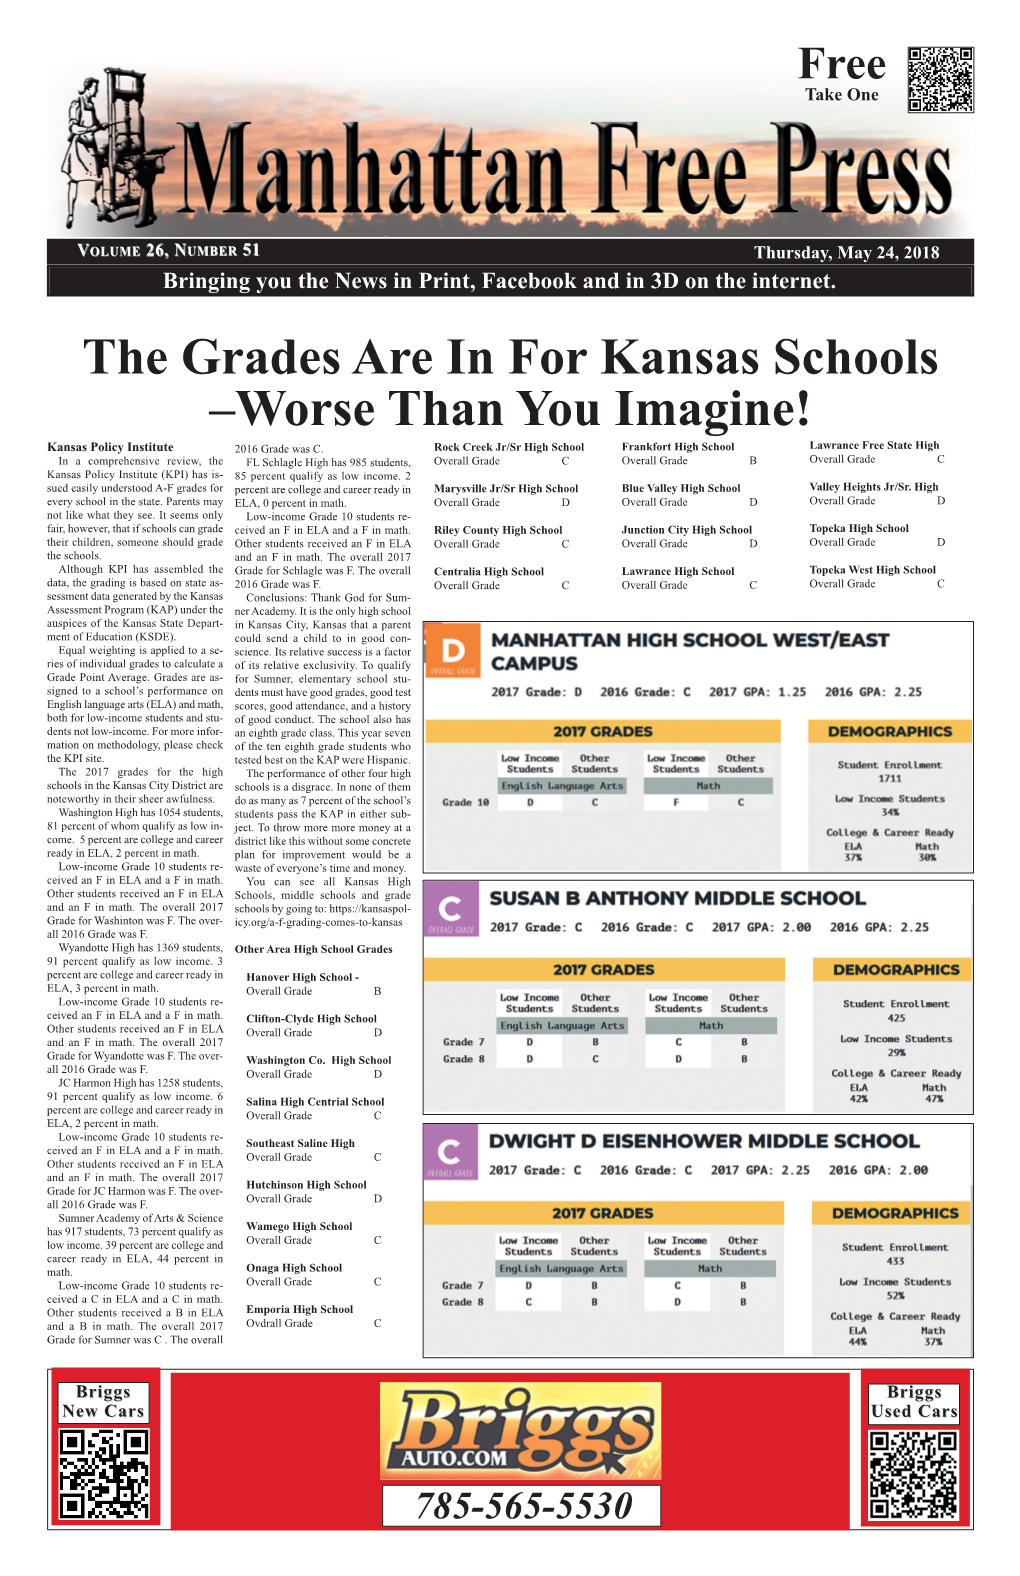 The Grades Are in for Kansas Schools –Worse Than You Imagine! Kansas Policy Institute 2016 Grade Was C